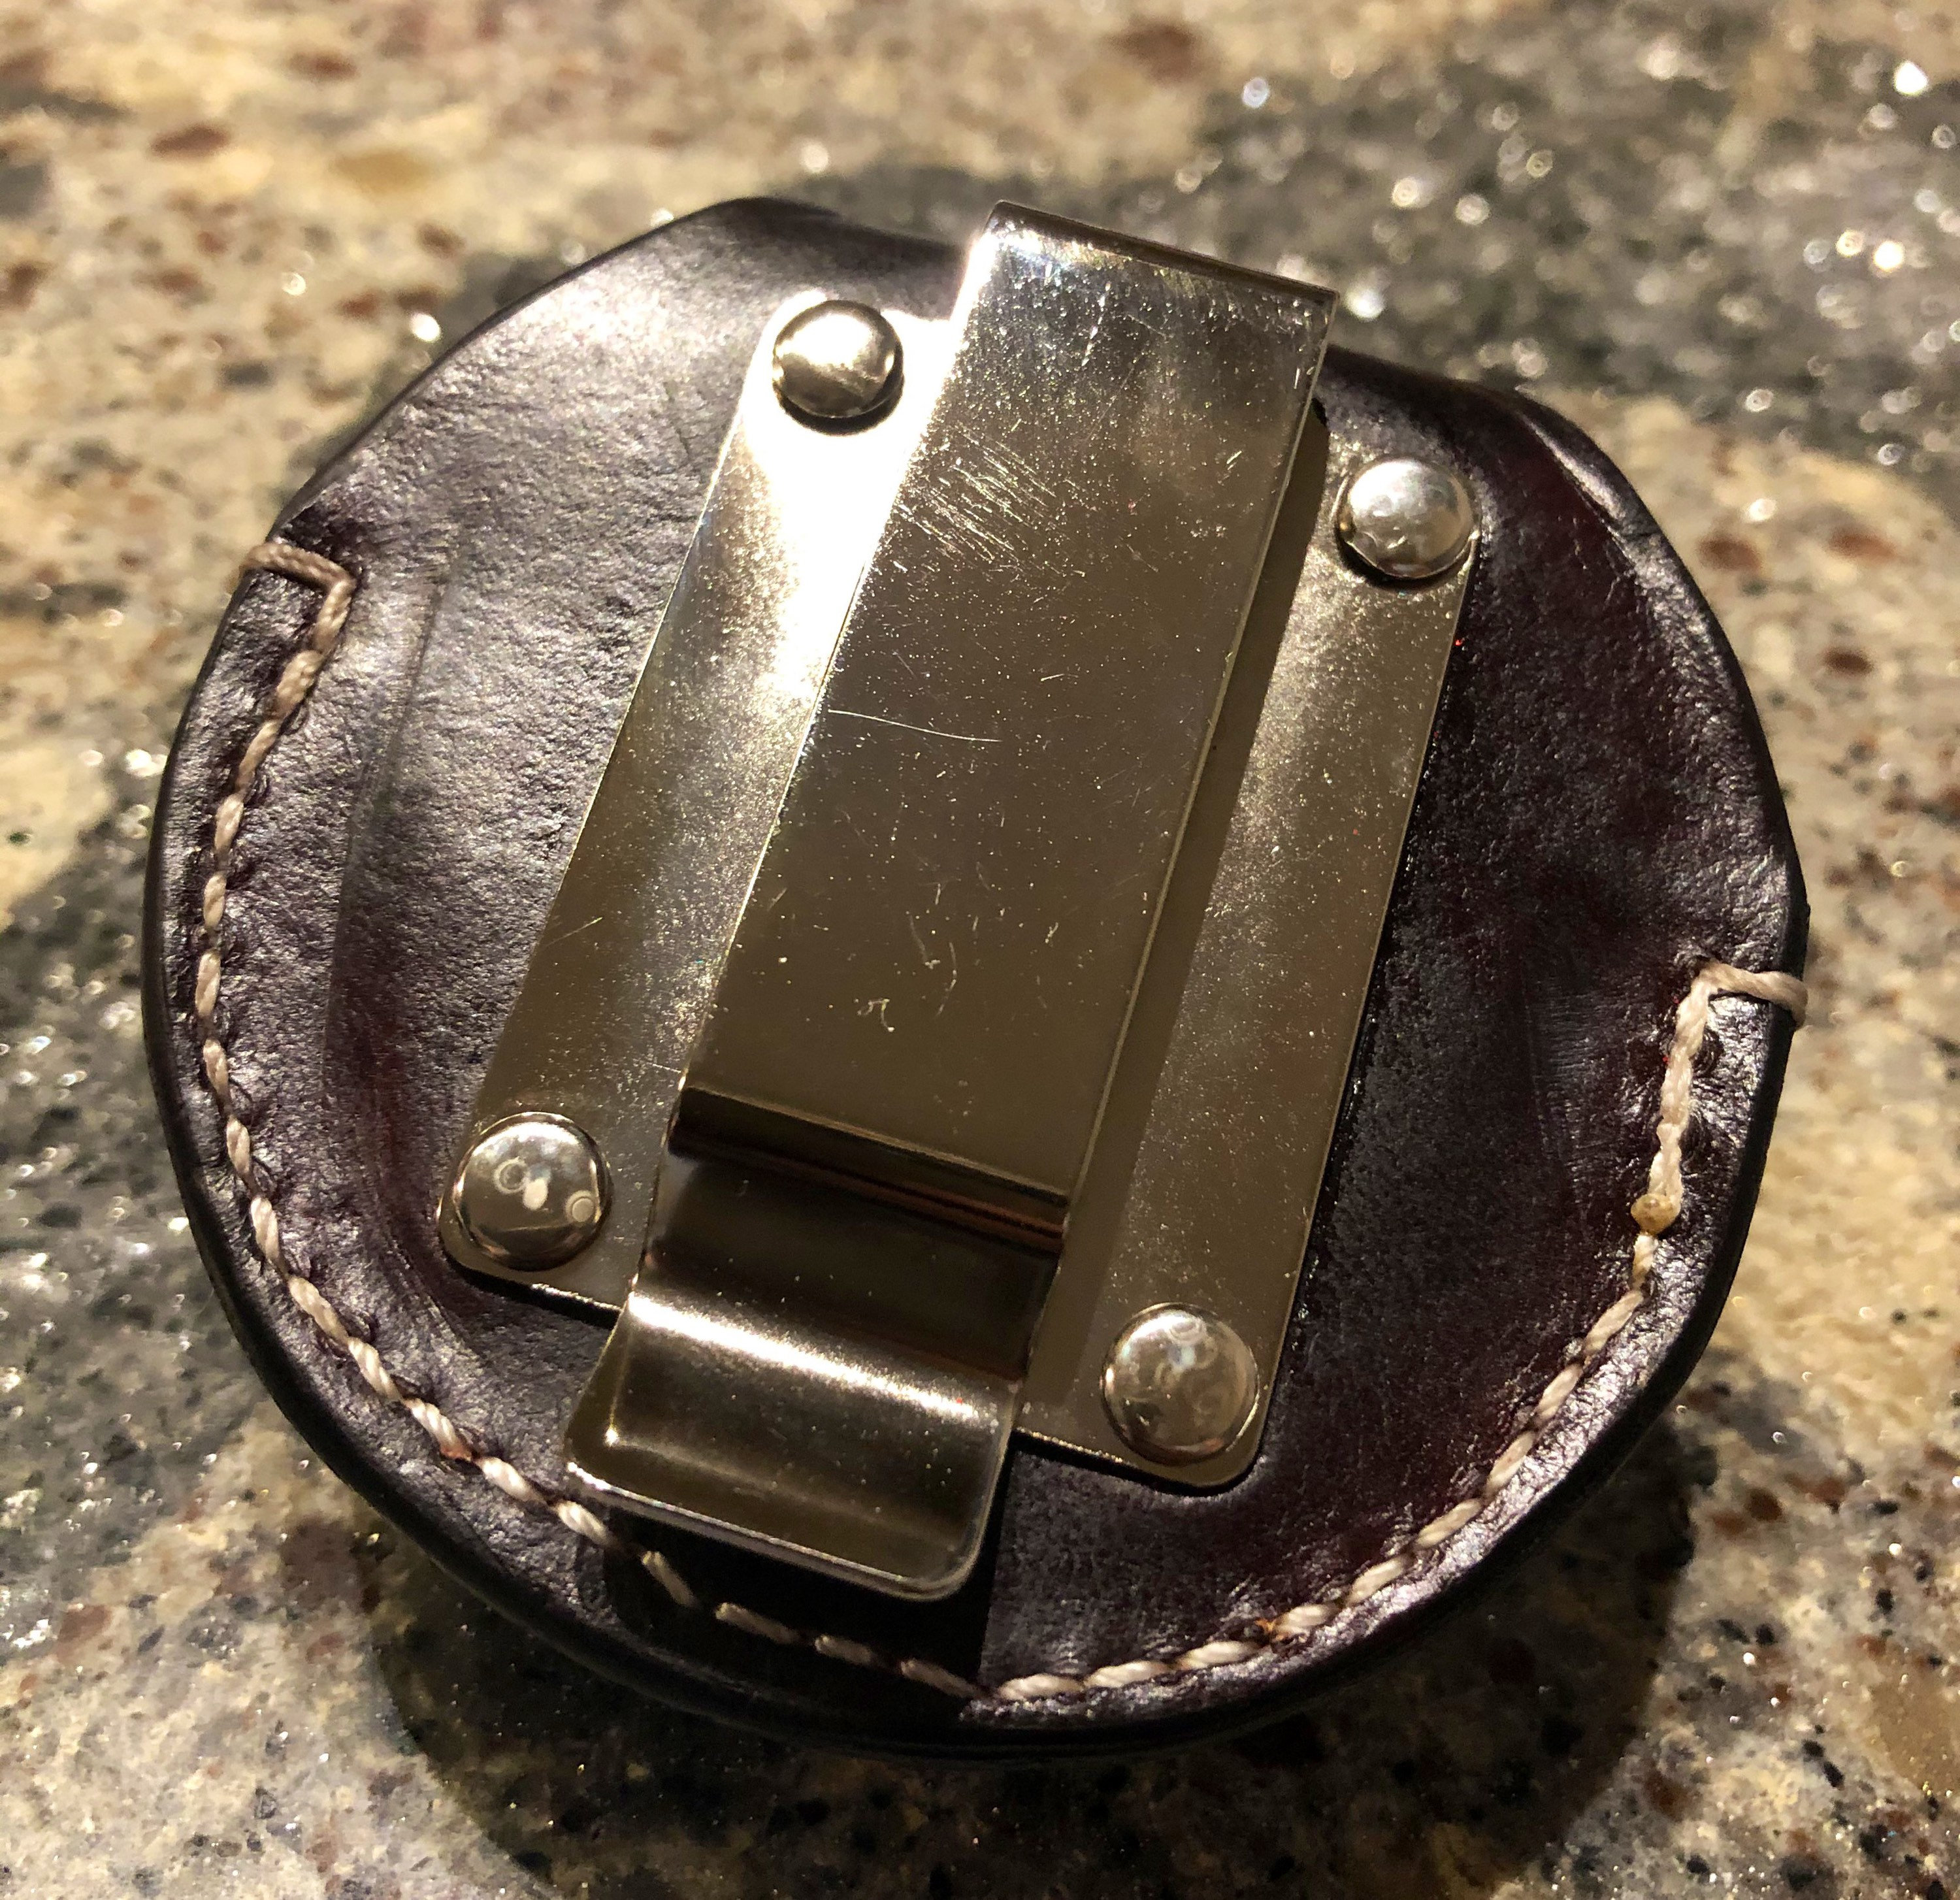 I designed my own zyn holster with universal clip mounts. I've been selling  them to students on campus. : r/3Dprinting